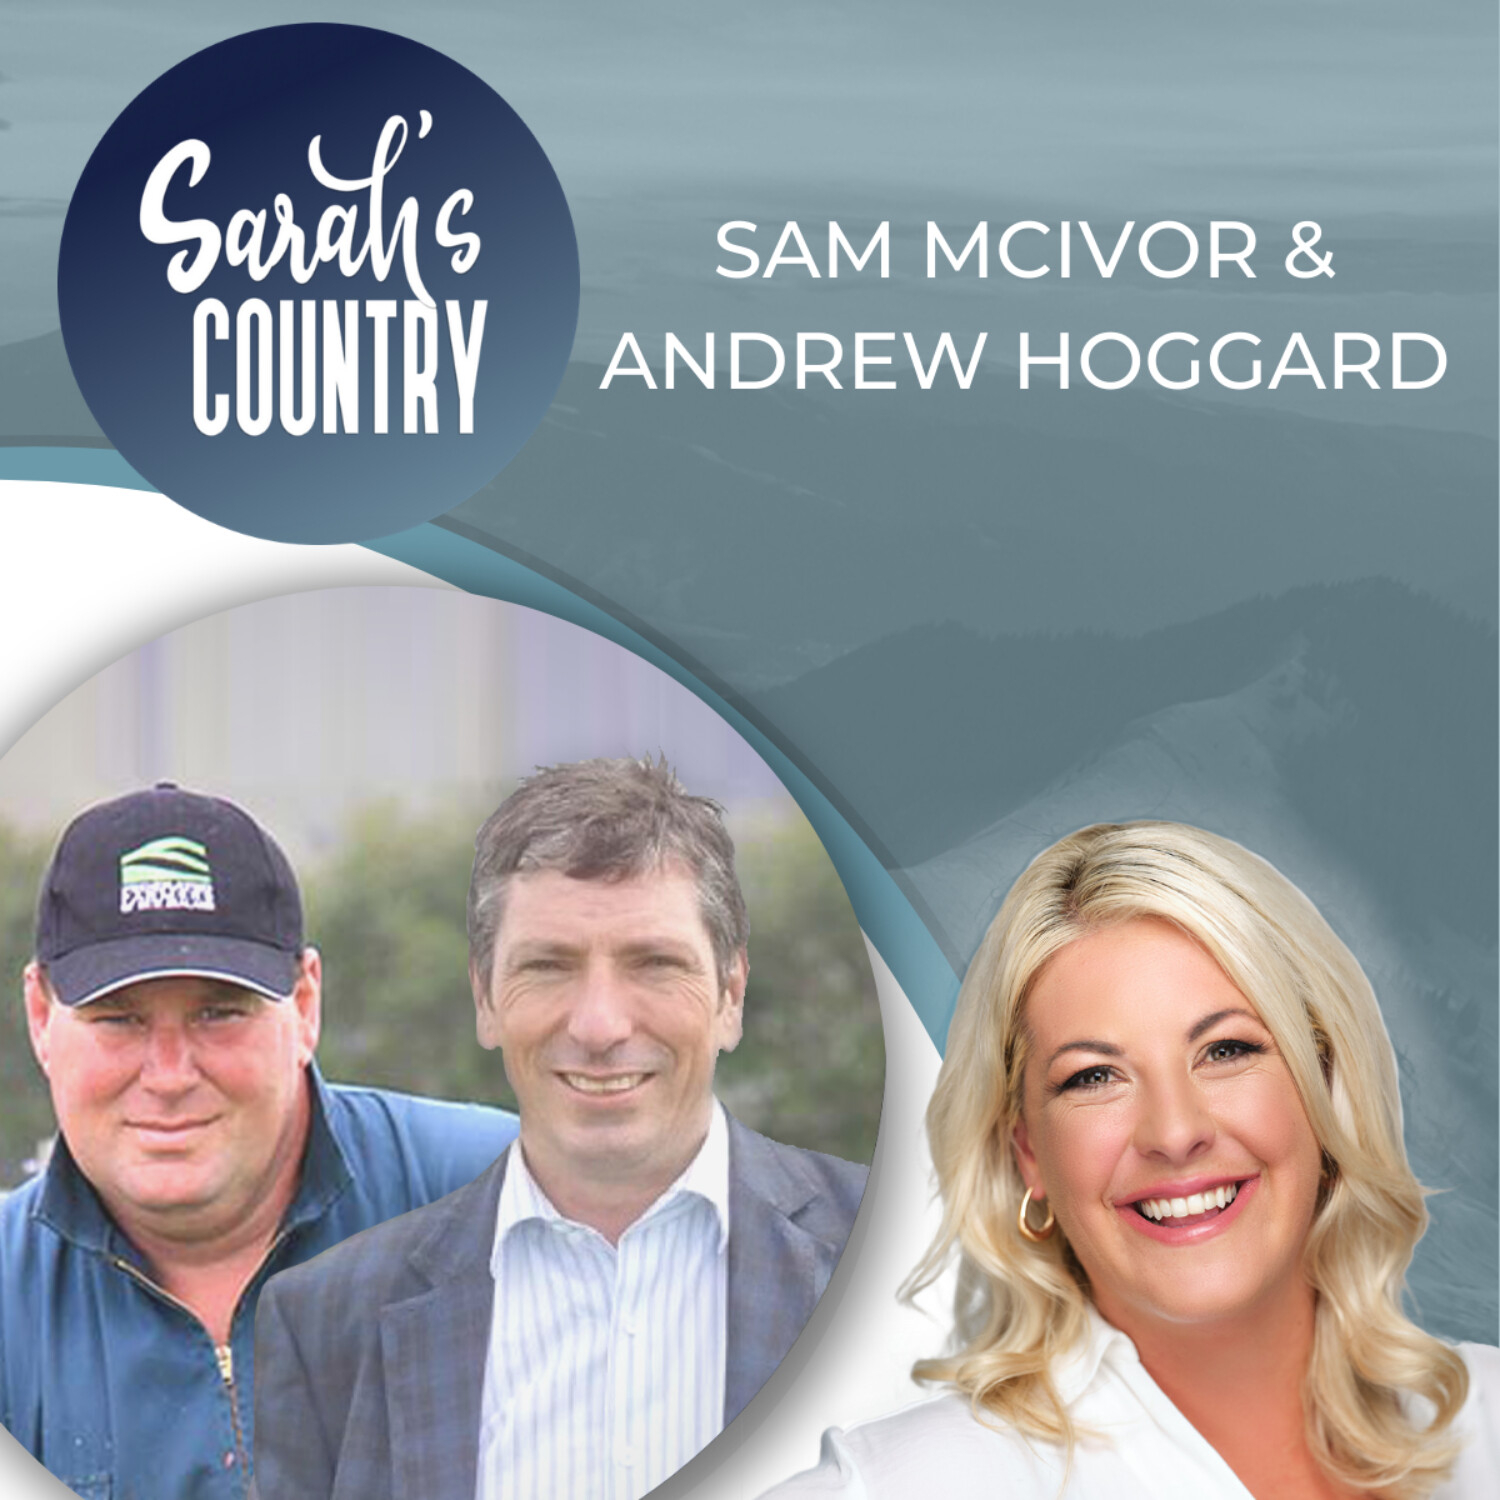 “2020 review and look ahead to 2021” with Sam McIvor & Andrew Hoggard